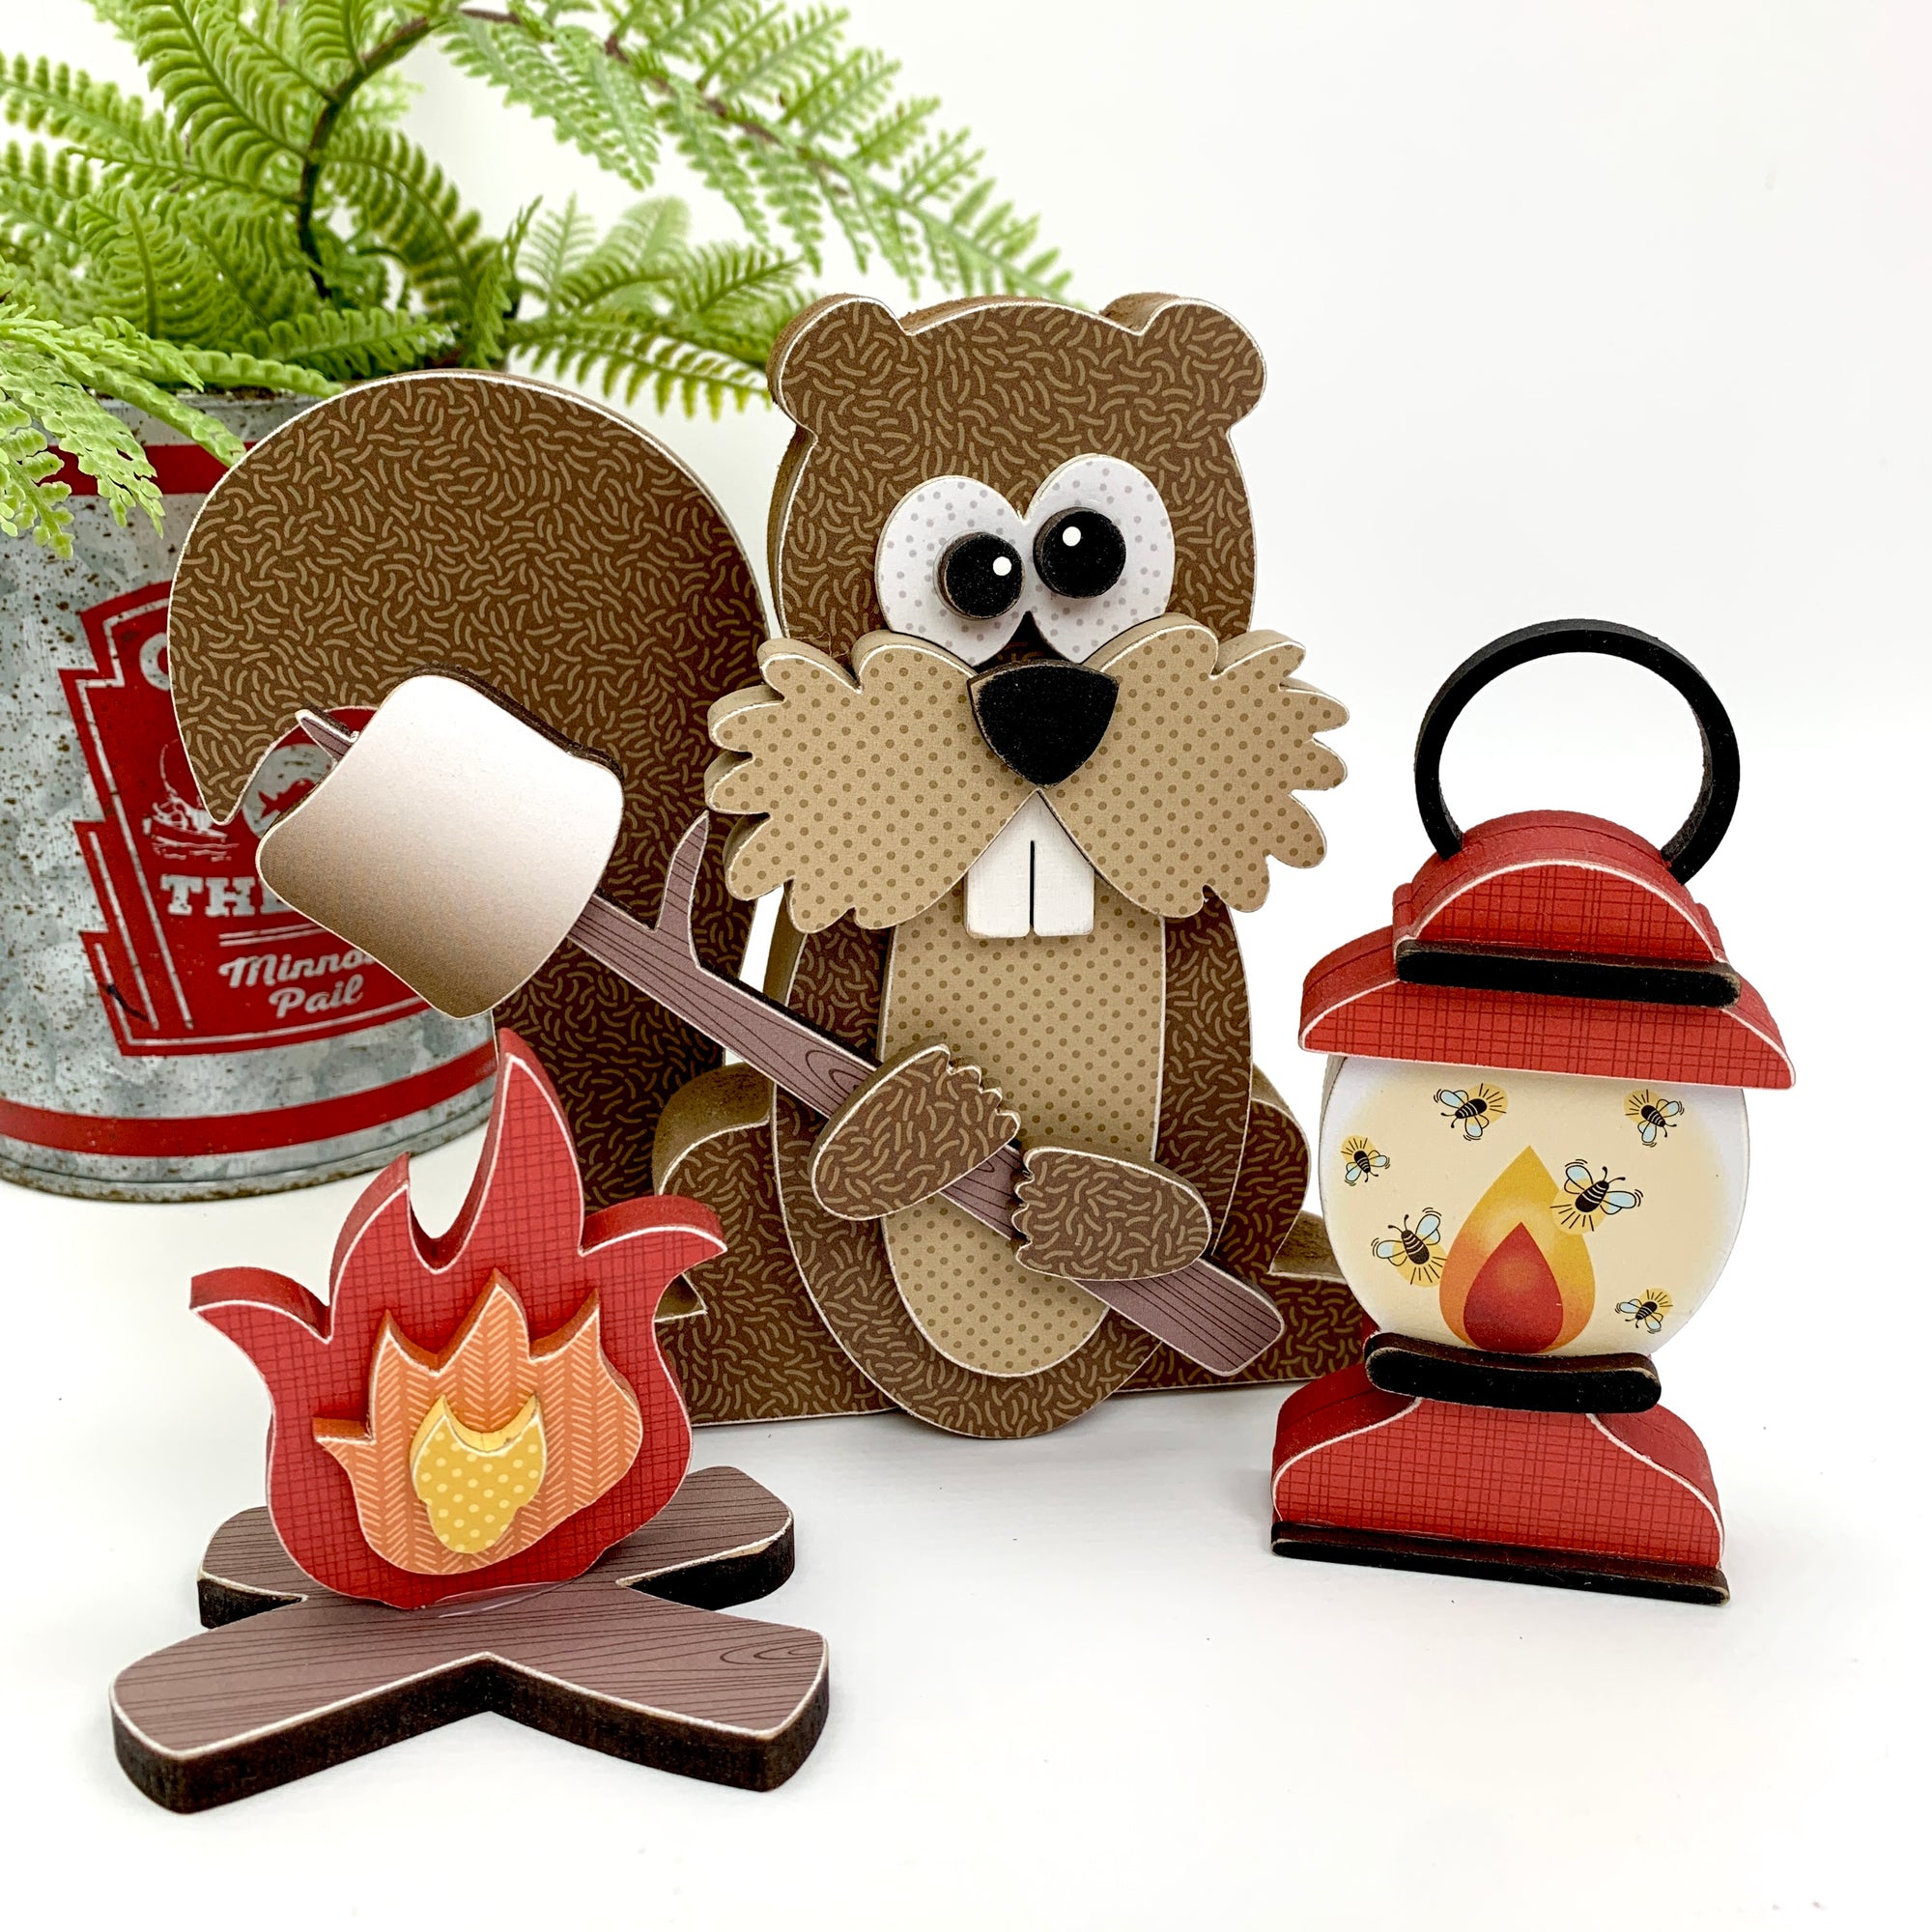 wood decor kit of a Woodland squirrel holding a marshmellow over a campfire with a lantern 